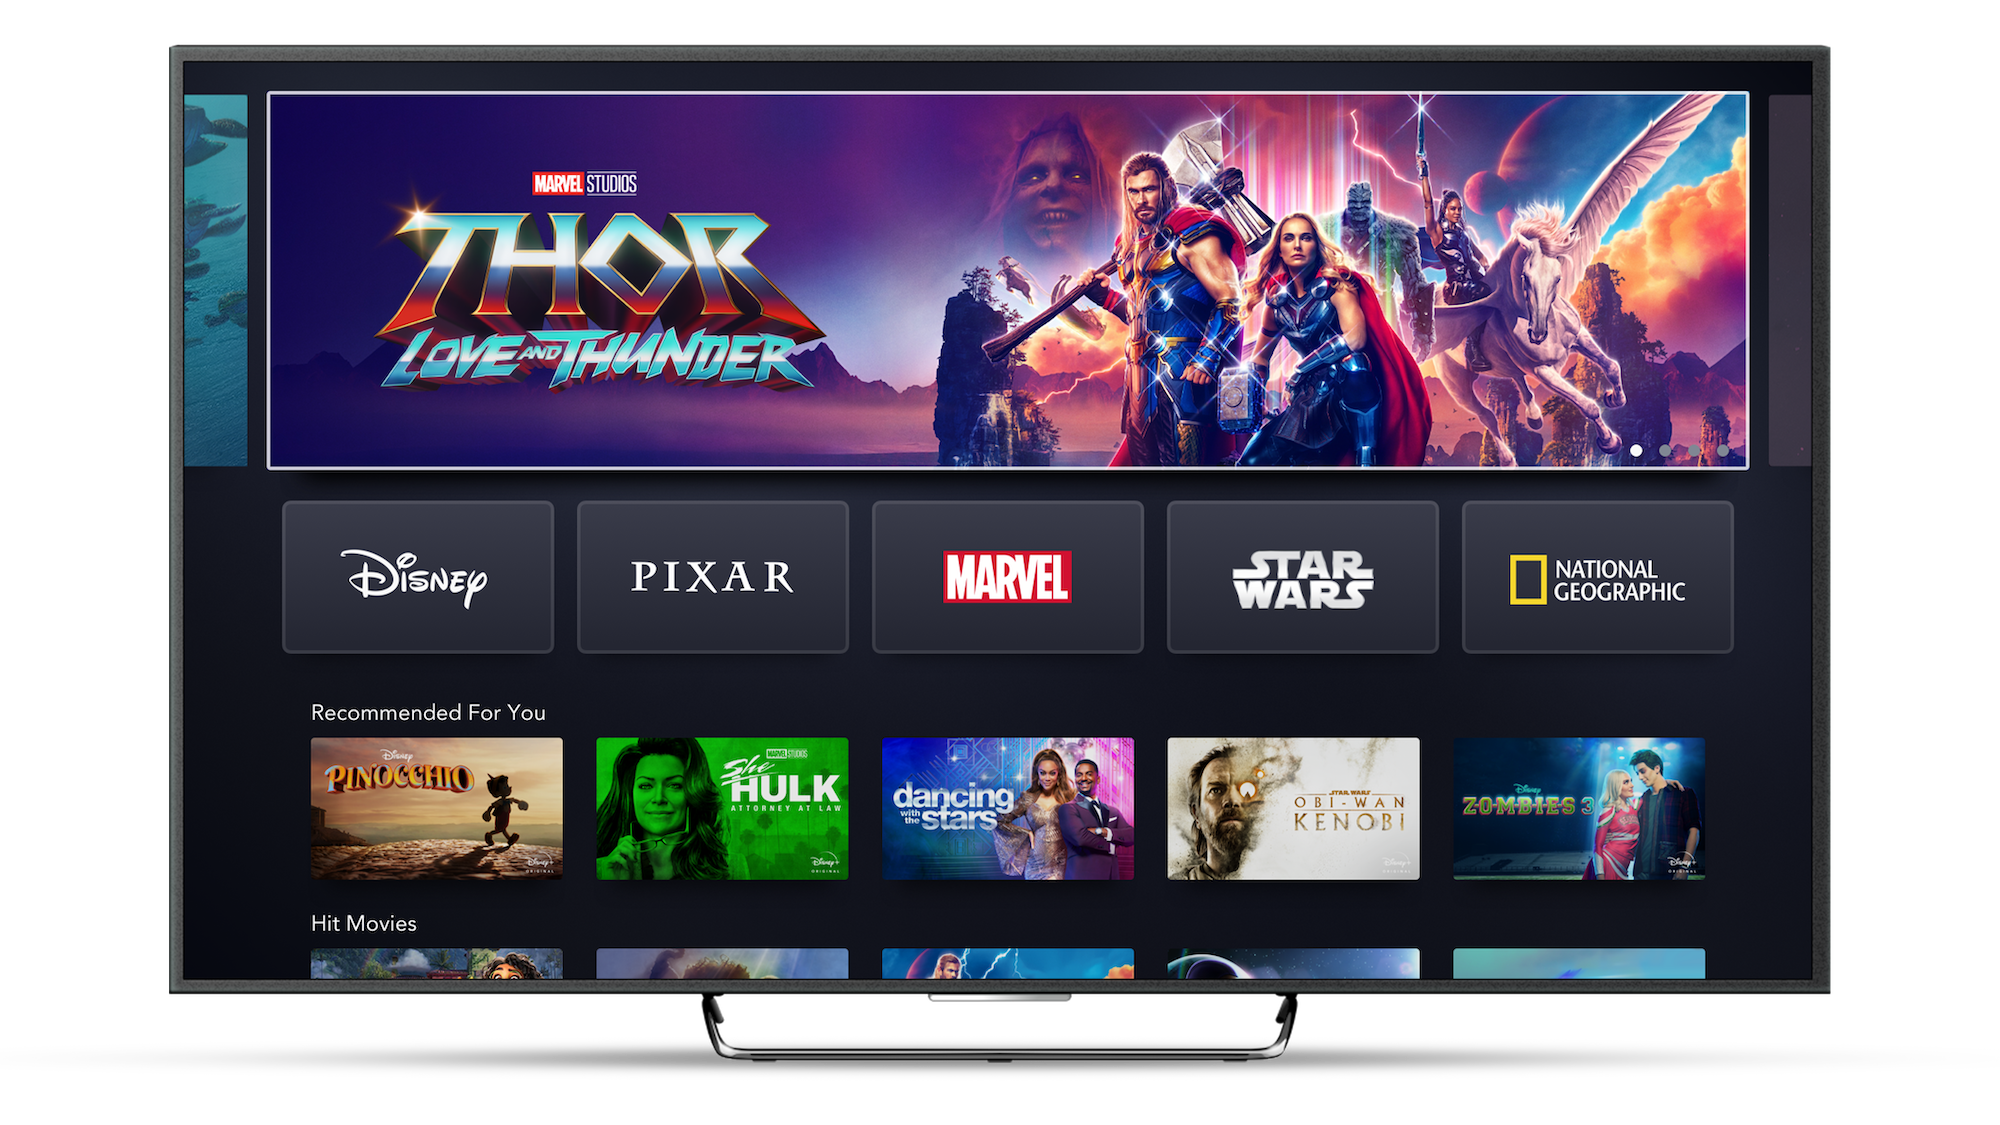 Disney+ App Home Page on Connected TV Device